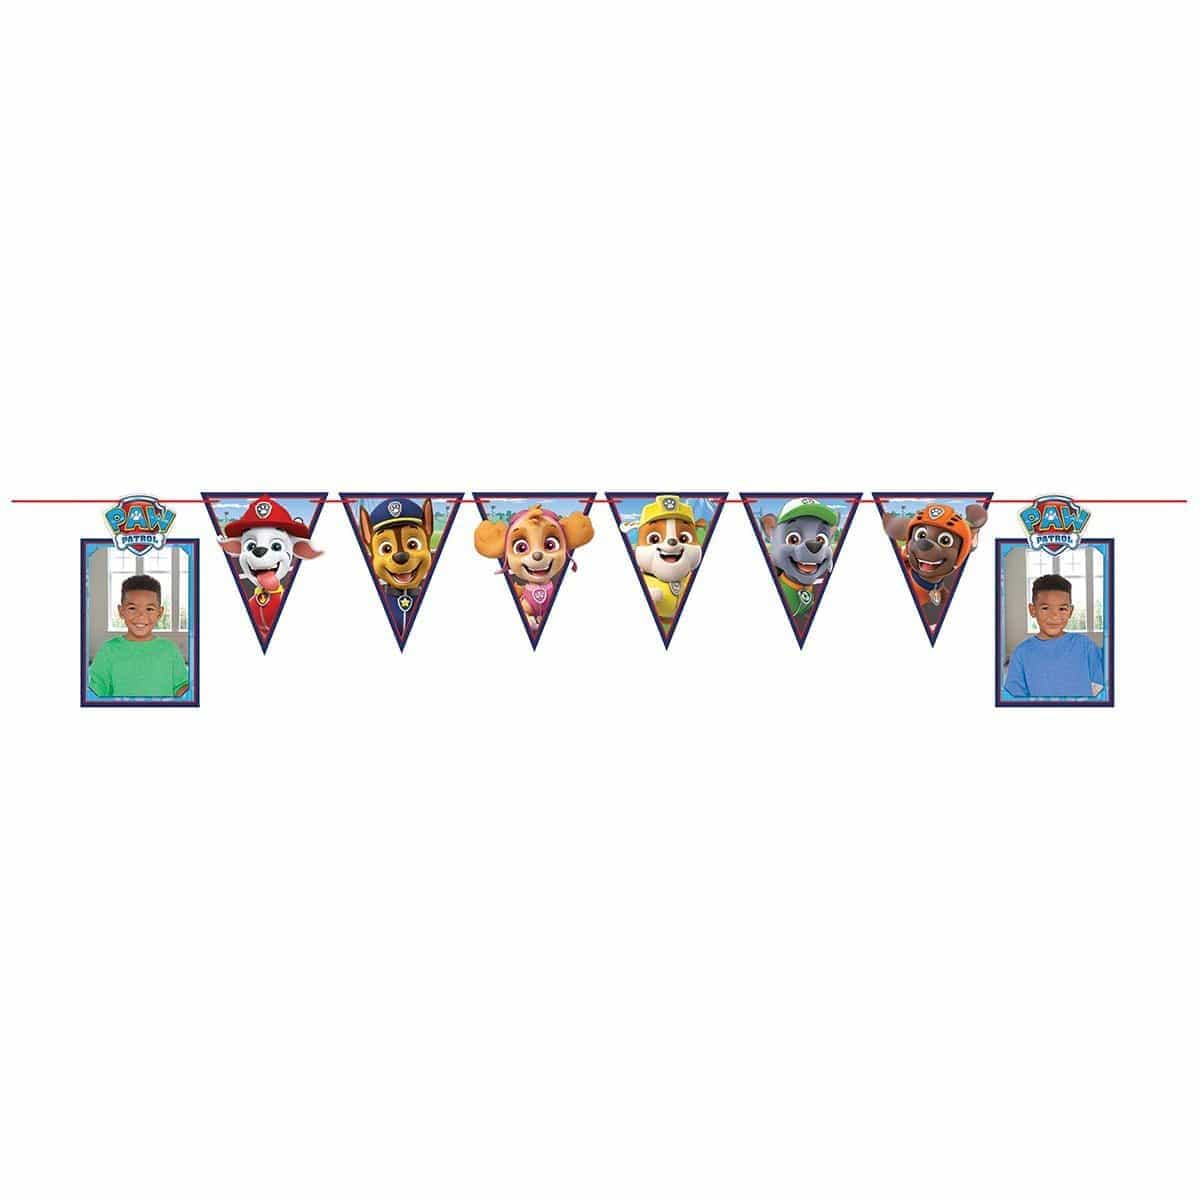 Buy Kids Birthday Paw Patrol photo banner sold at Party Expert